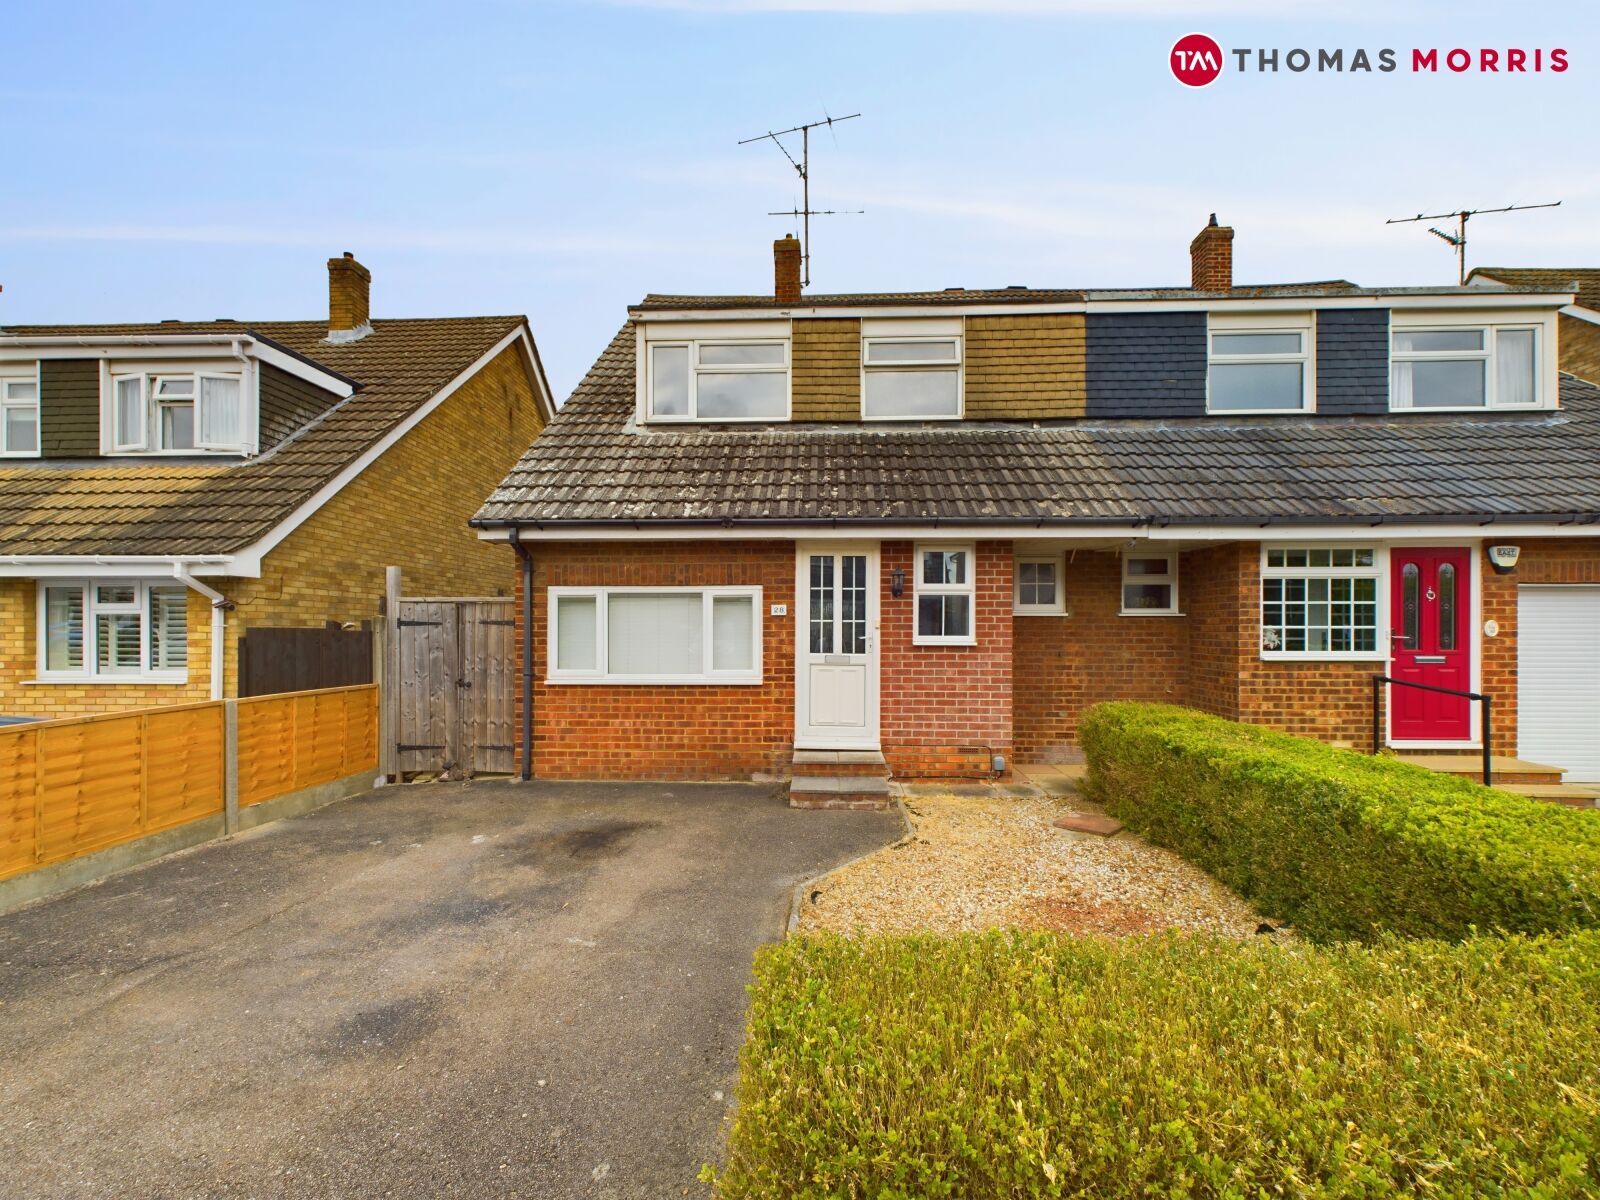 3 bedroom semi detached house for sale Cherry Drive, Royston, SG8, main image